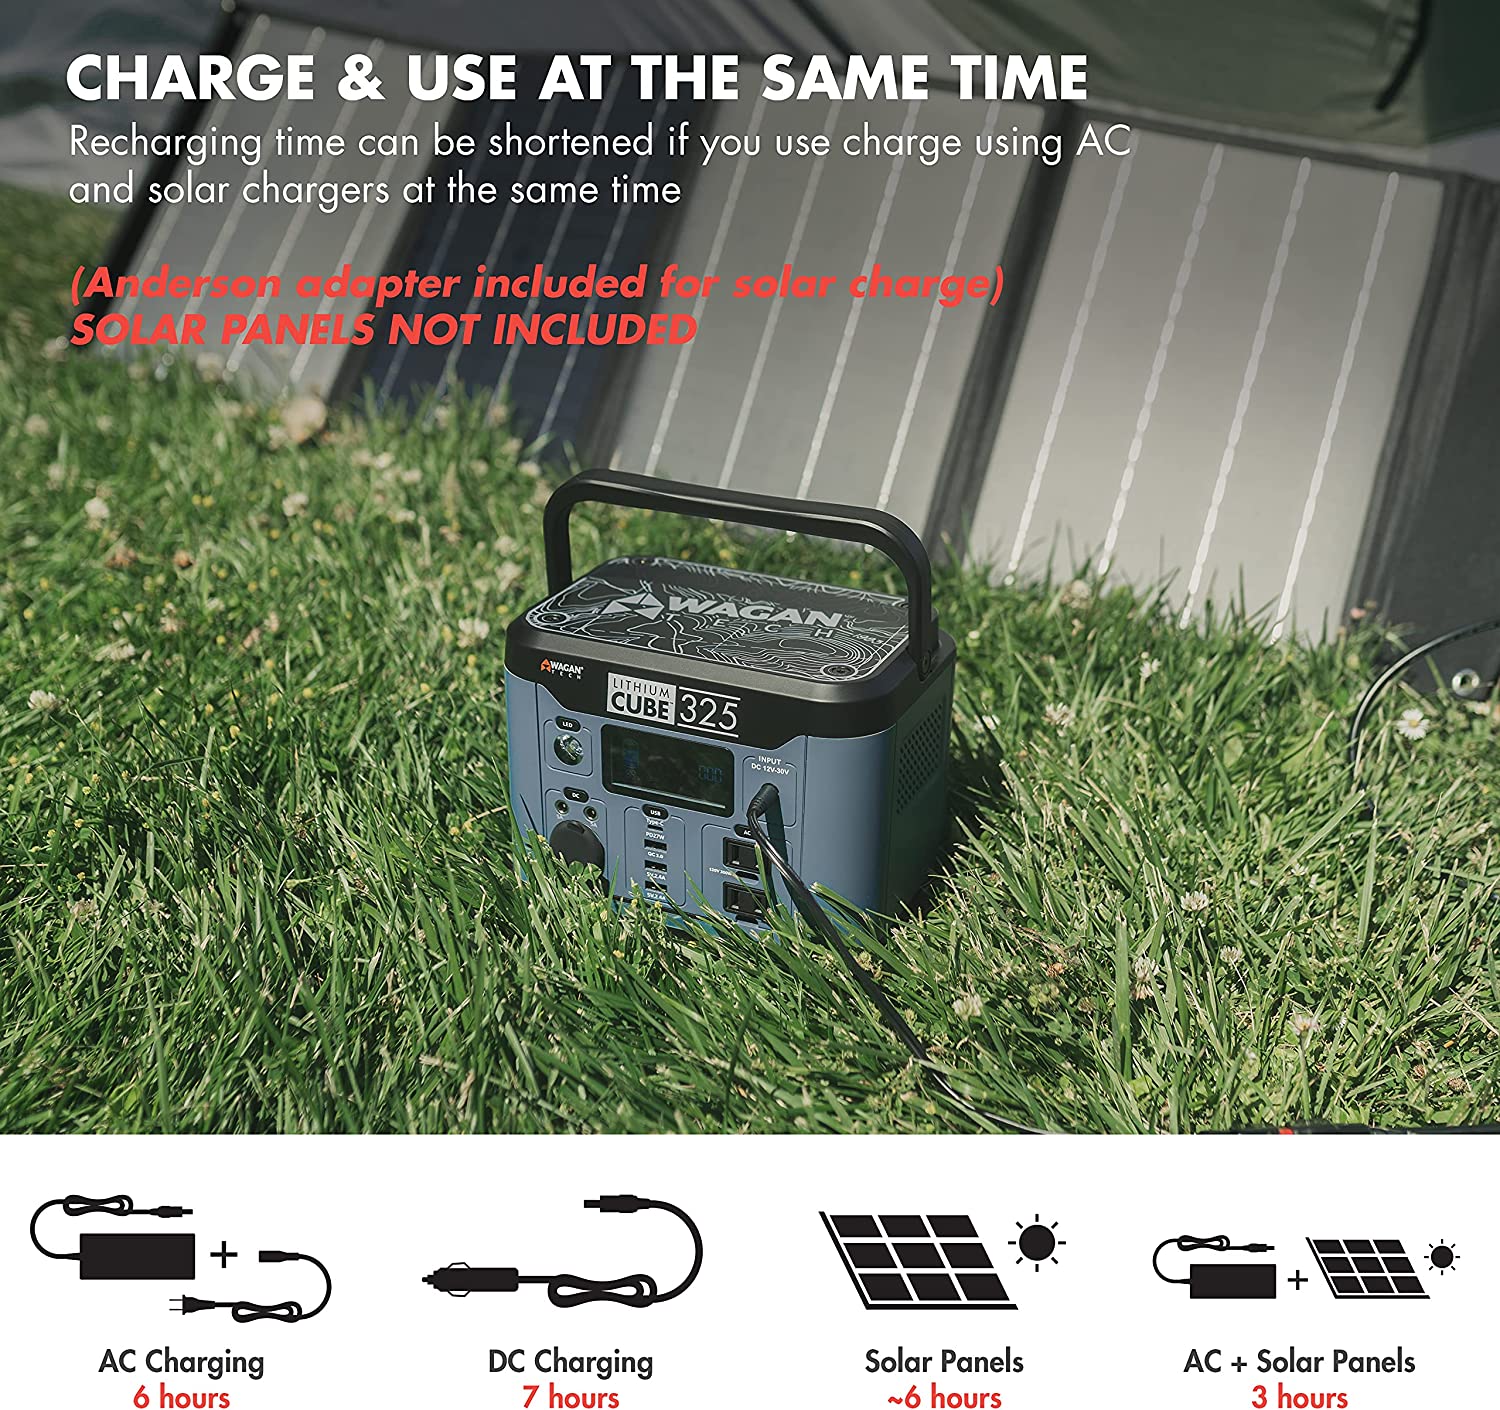 Wagan 8832 Lithium Cube 325 Portable Power Station 324Wh Backup Lithium Battery New